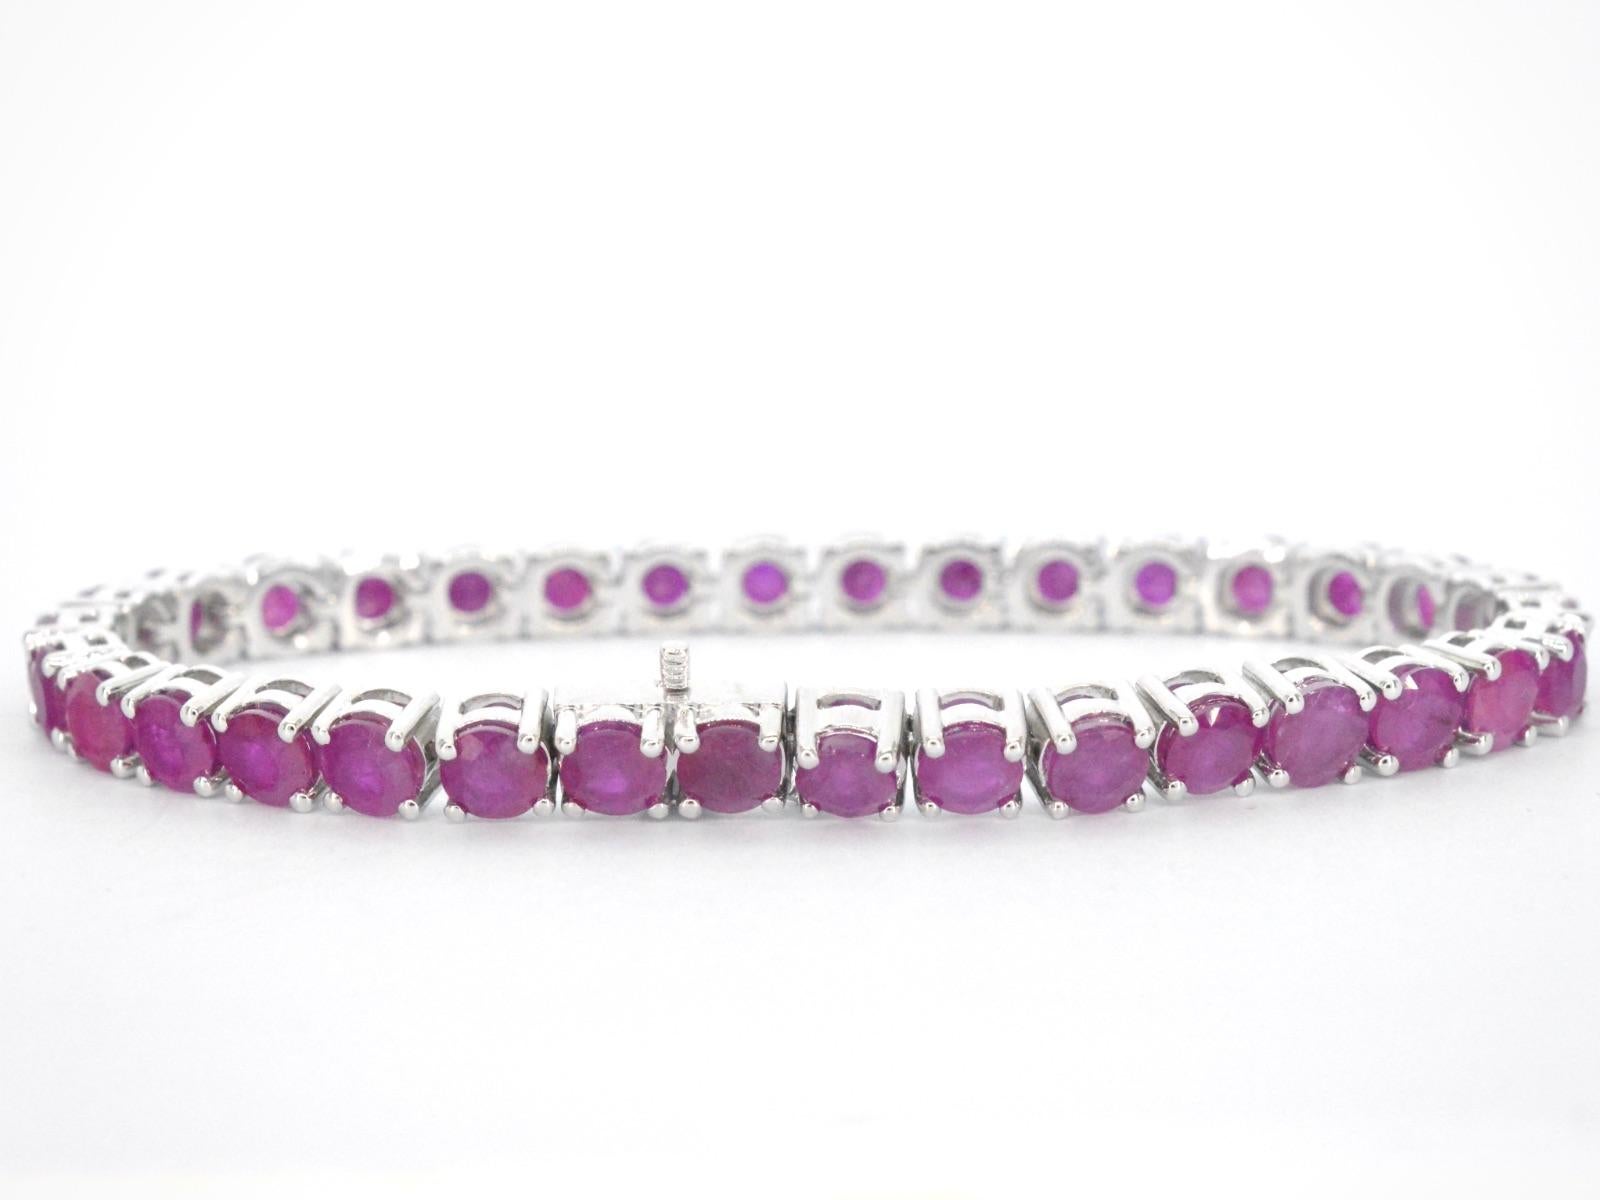 This exquisite white gold tennis bracelet is crafted from 14 karat white gold and features an impressive 17.50 carats of brilliant cut rubies, carefully set along the band for a continuous and dazzling display of colour. The rubies are of high